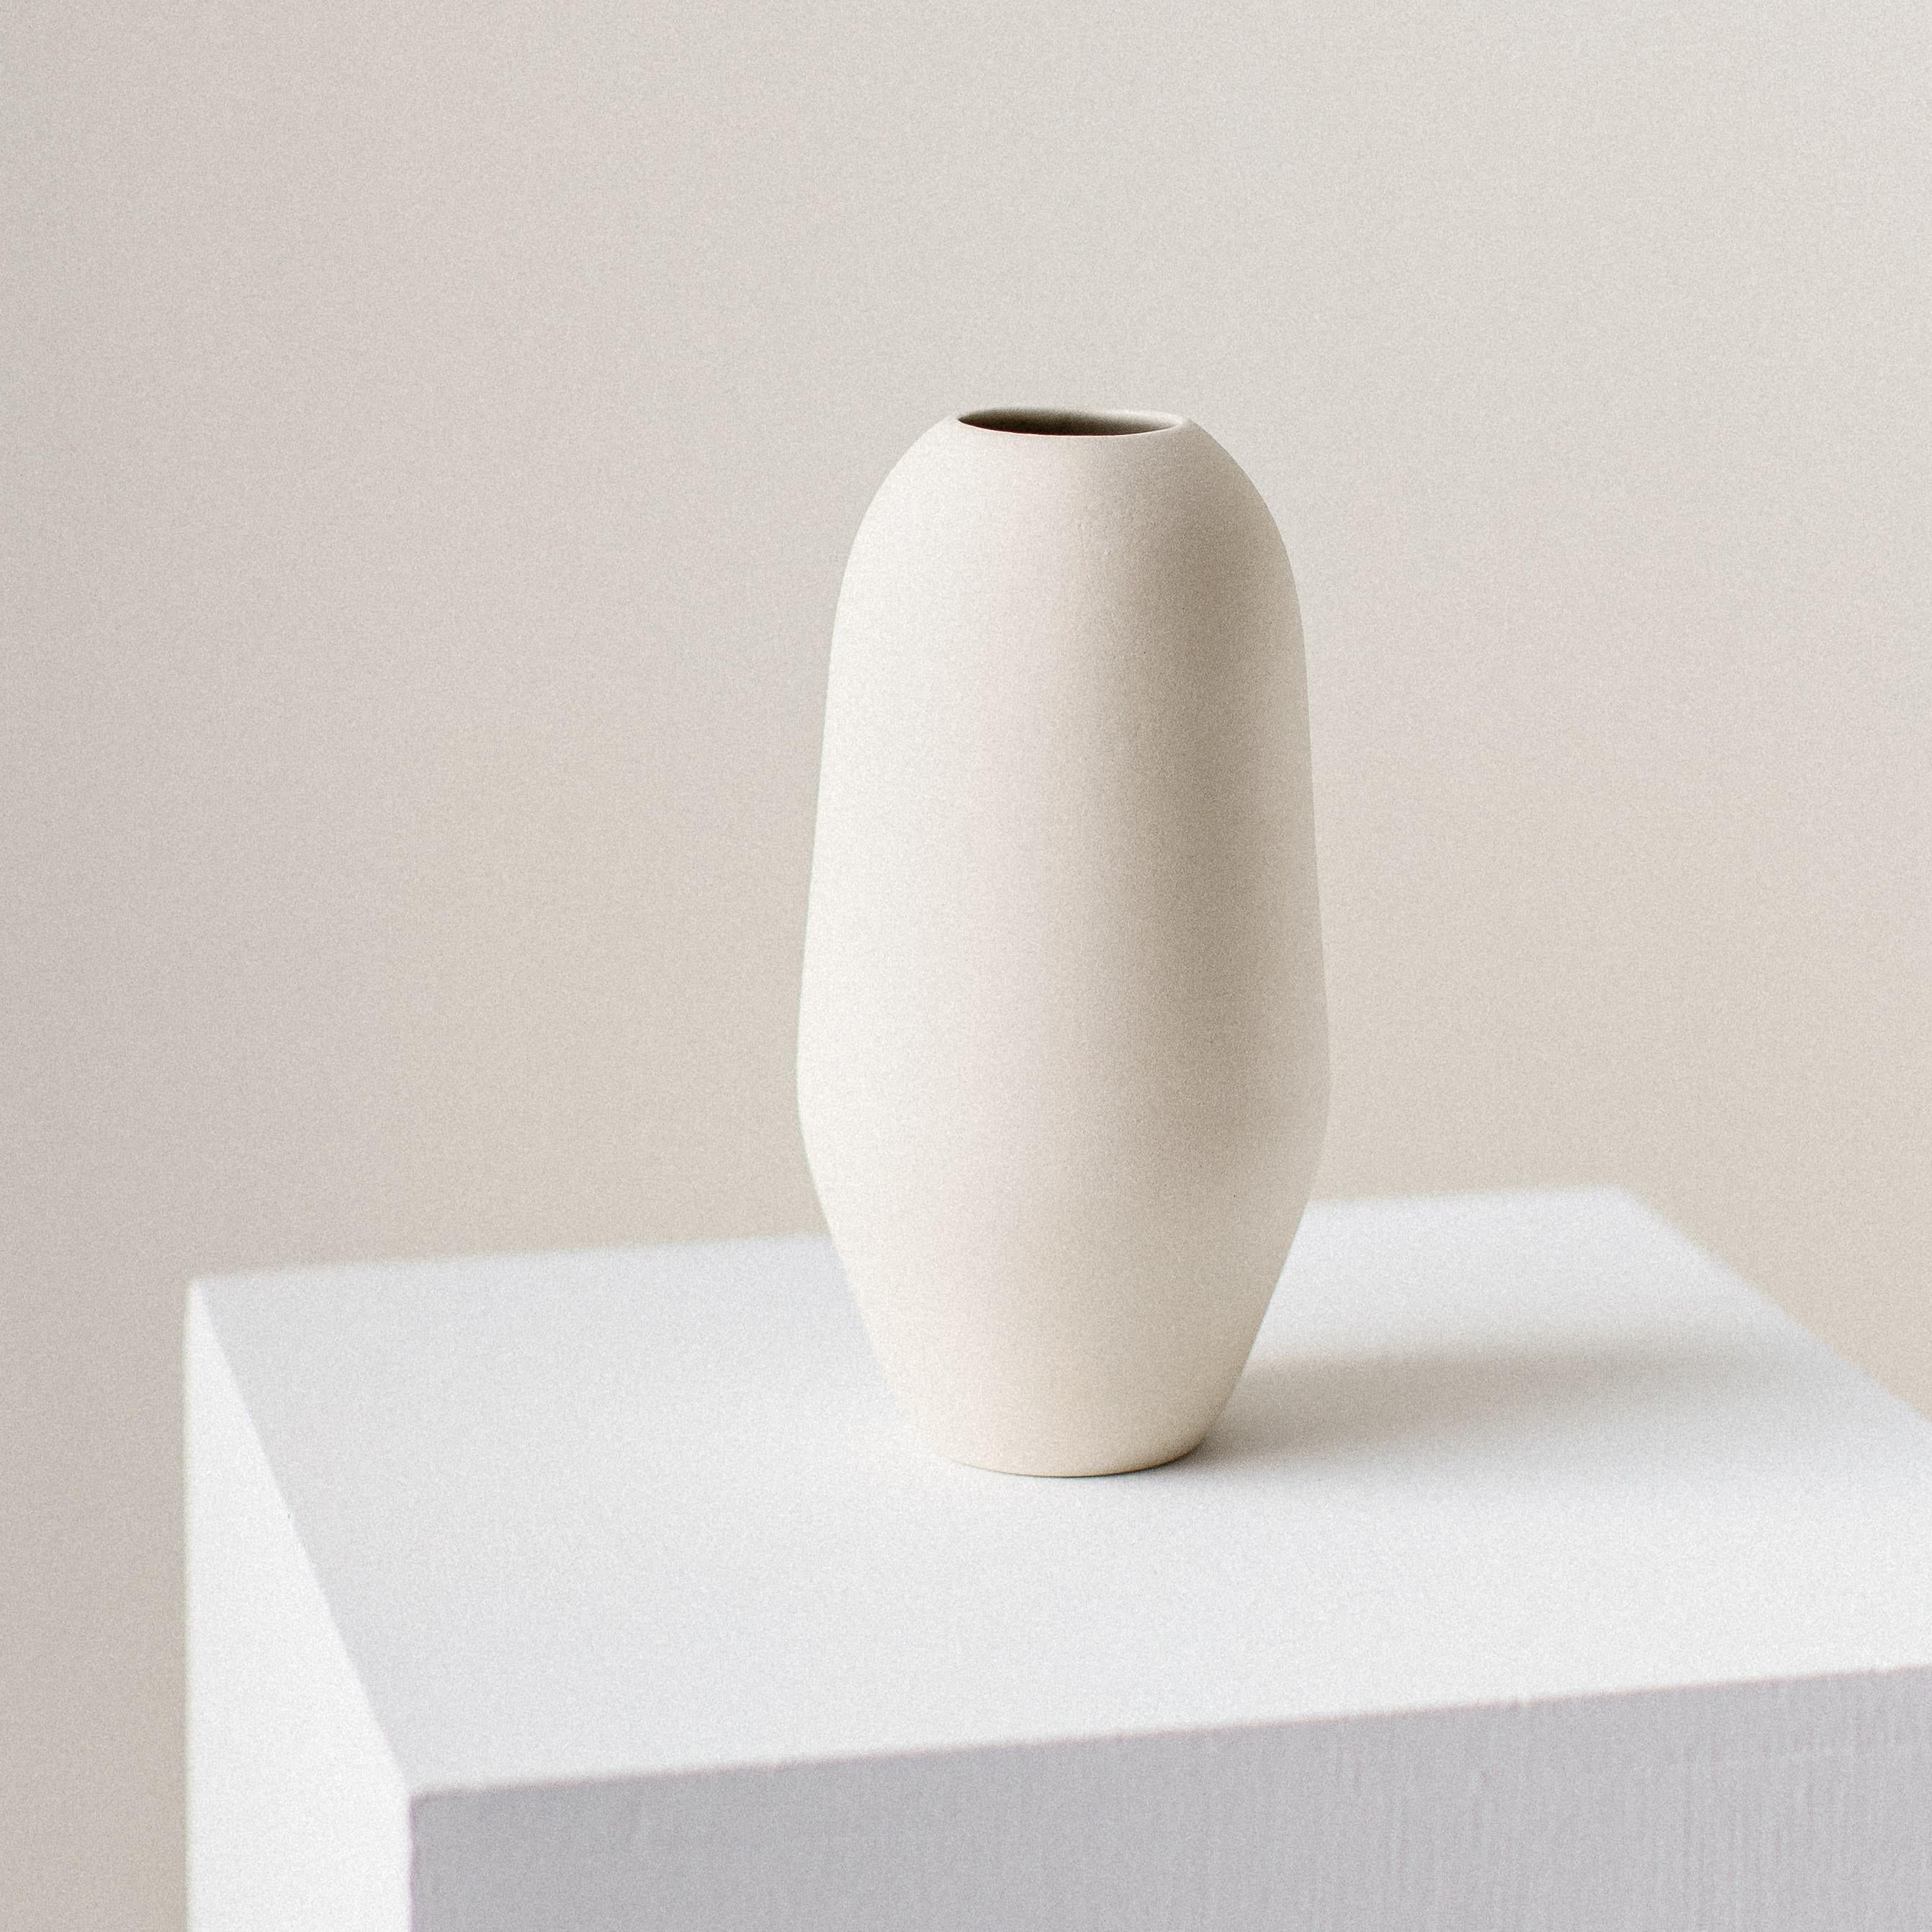 Unique heir vessel by Dust and Form
Dimensions: D 8.8 x 17 H cm
Materials: Porcelain

Origin Form Collection in three finishes: Hand-sanded (our classic, smooth, bare finish) Ivory (satin white glaze) Charcoal (matte black glaze). Please contact us.